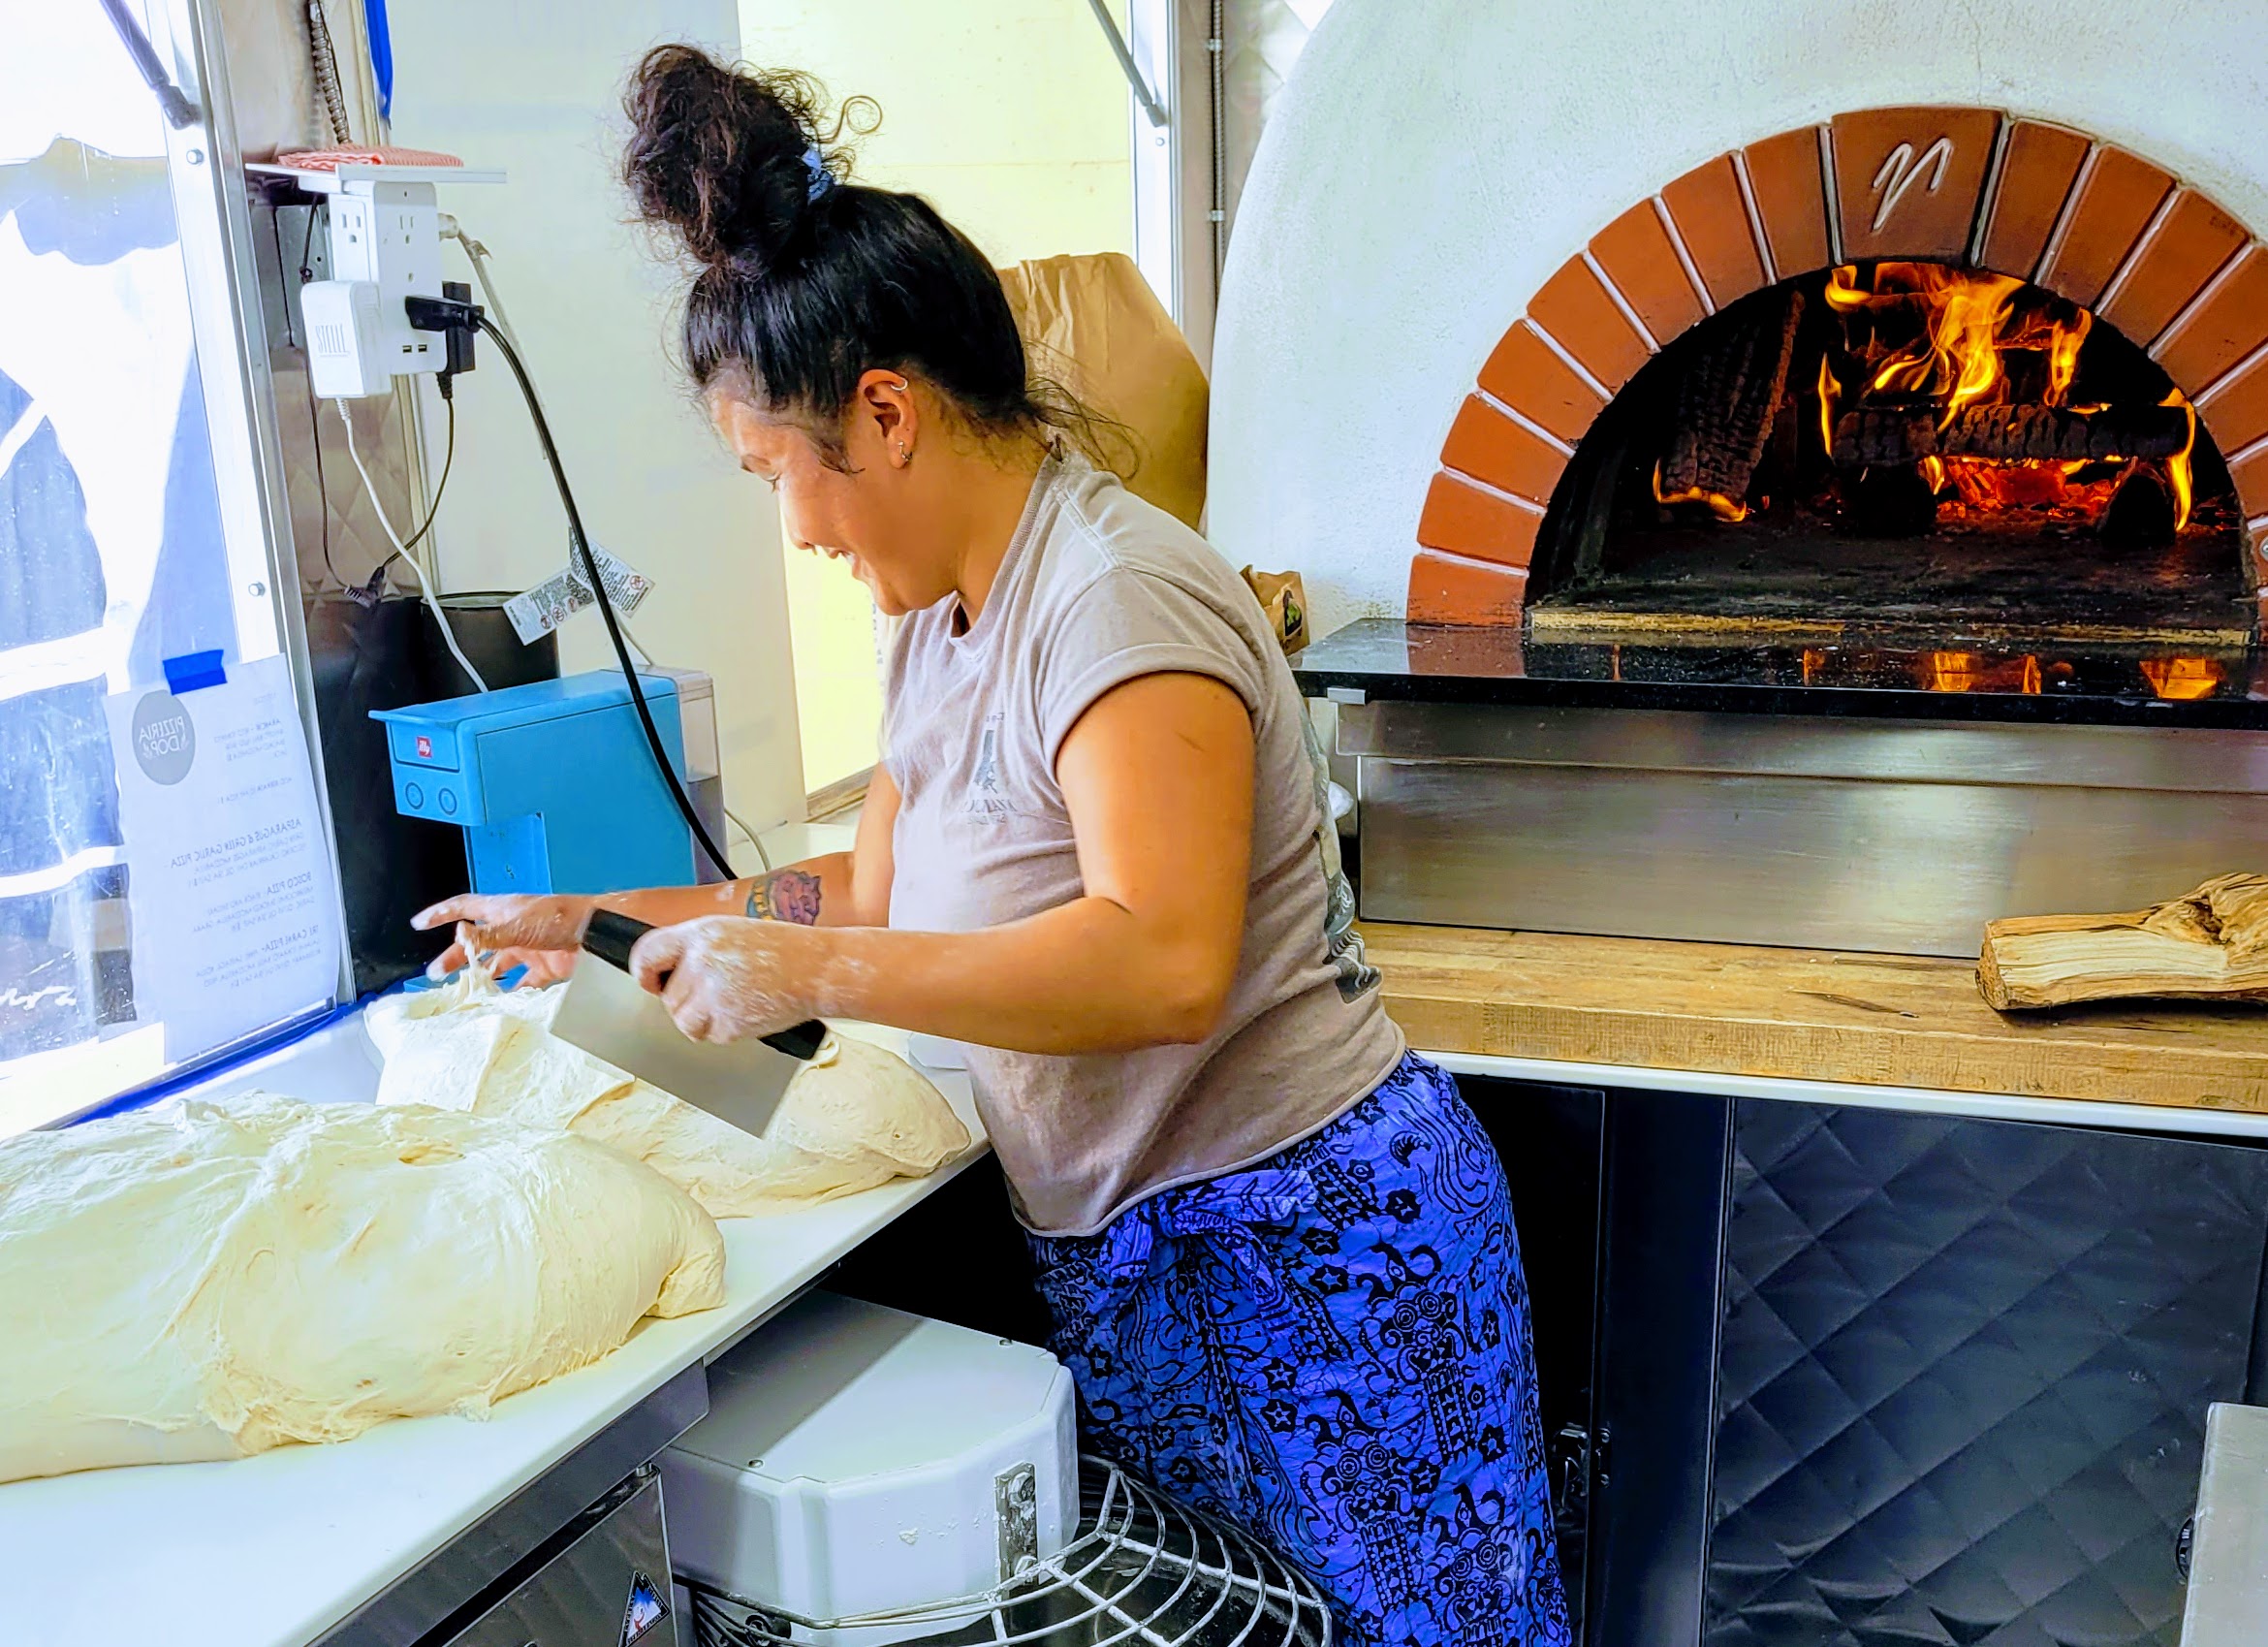 A woman cuts pieces of pizza dough from a large ball of dough. A wood-fired oven is in the background.